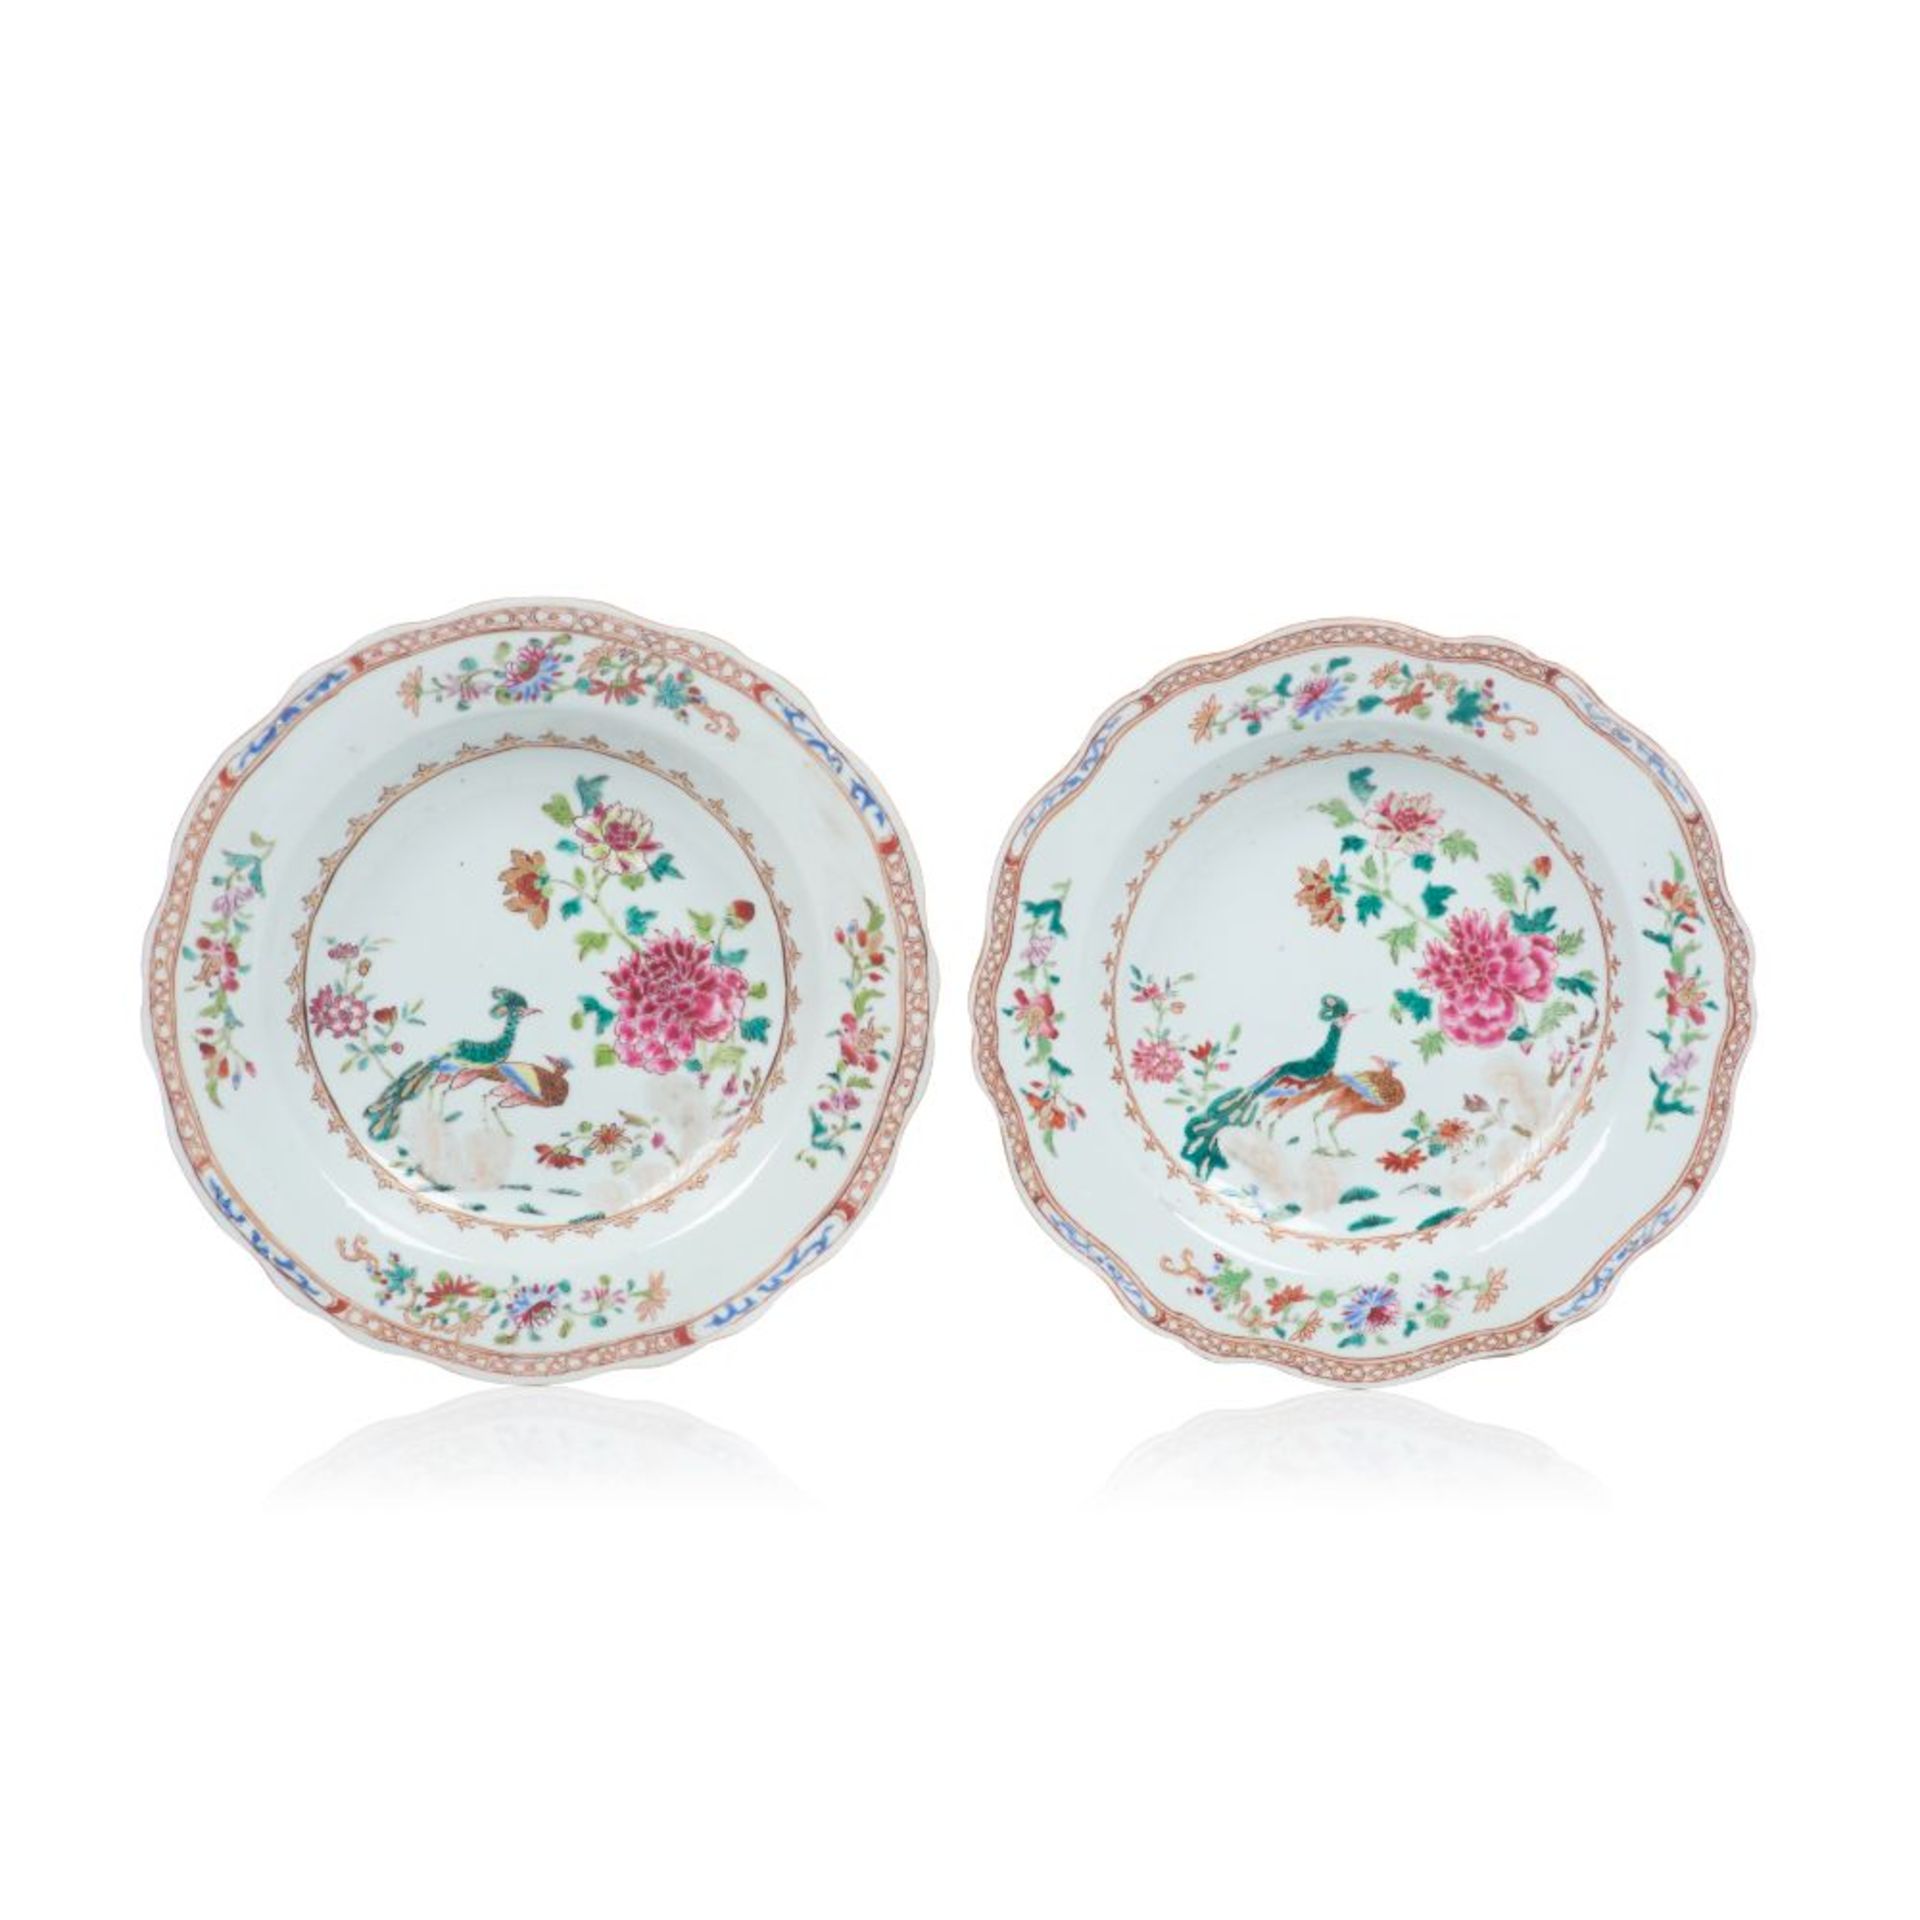 A pair of scalloped deep plates, Chinese export porcelain, Polychrome "Famille Rose" enamelled